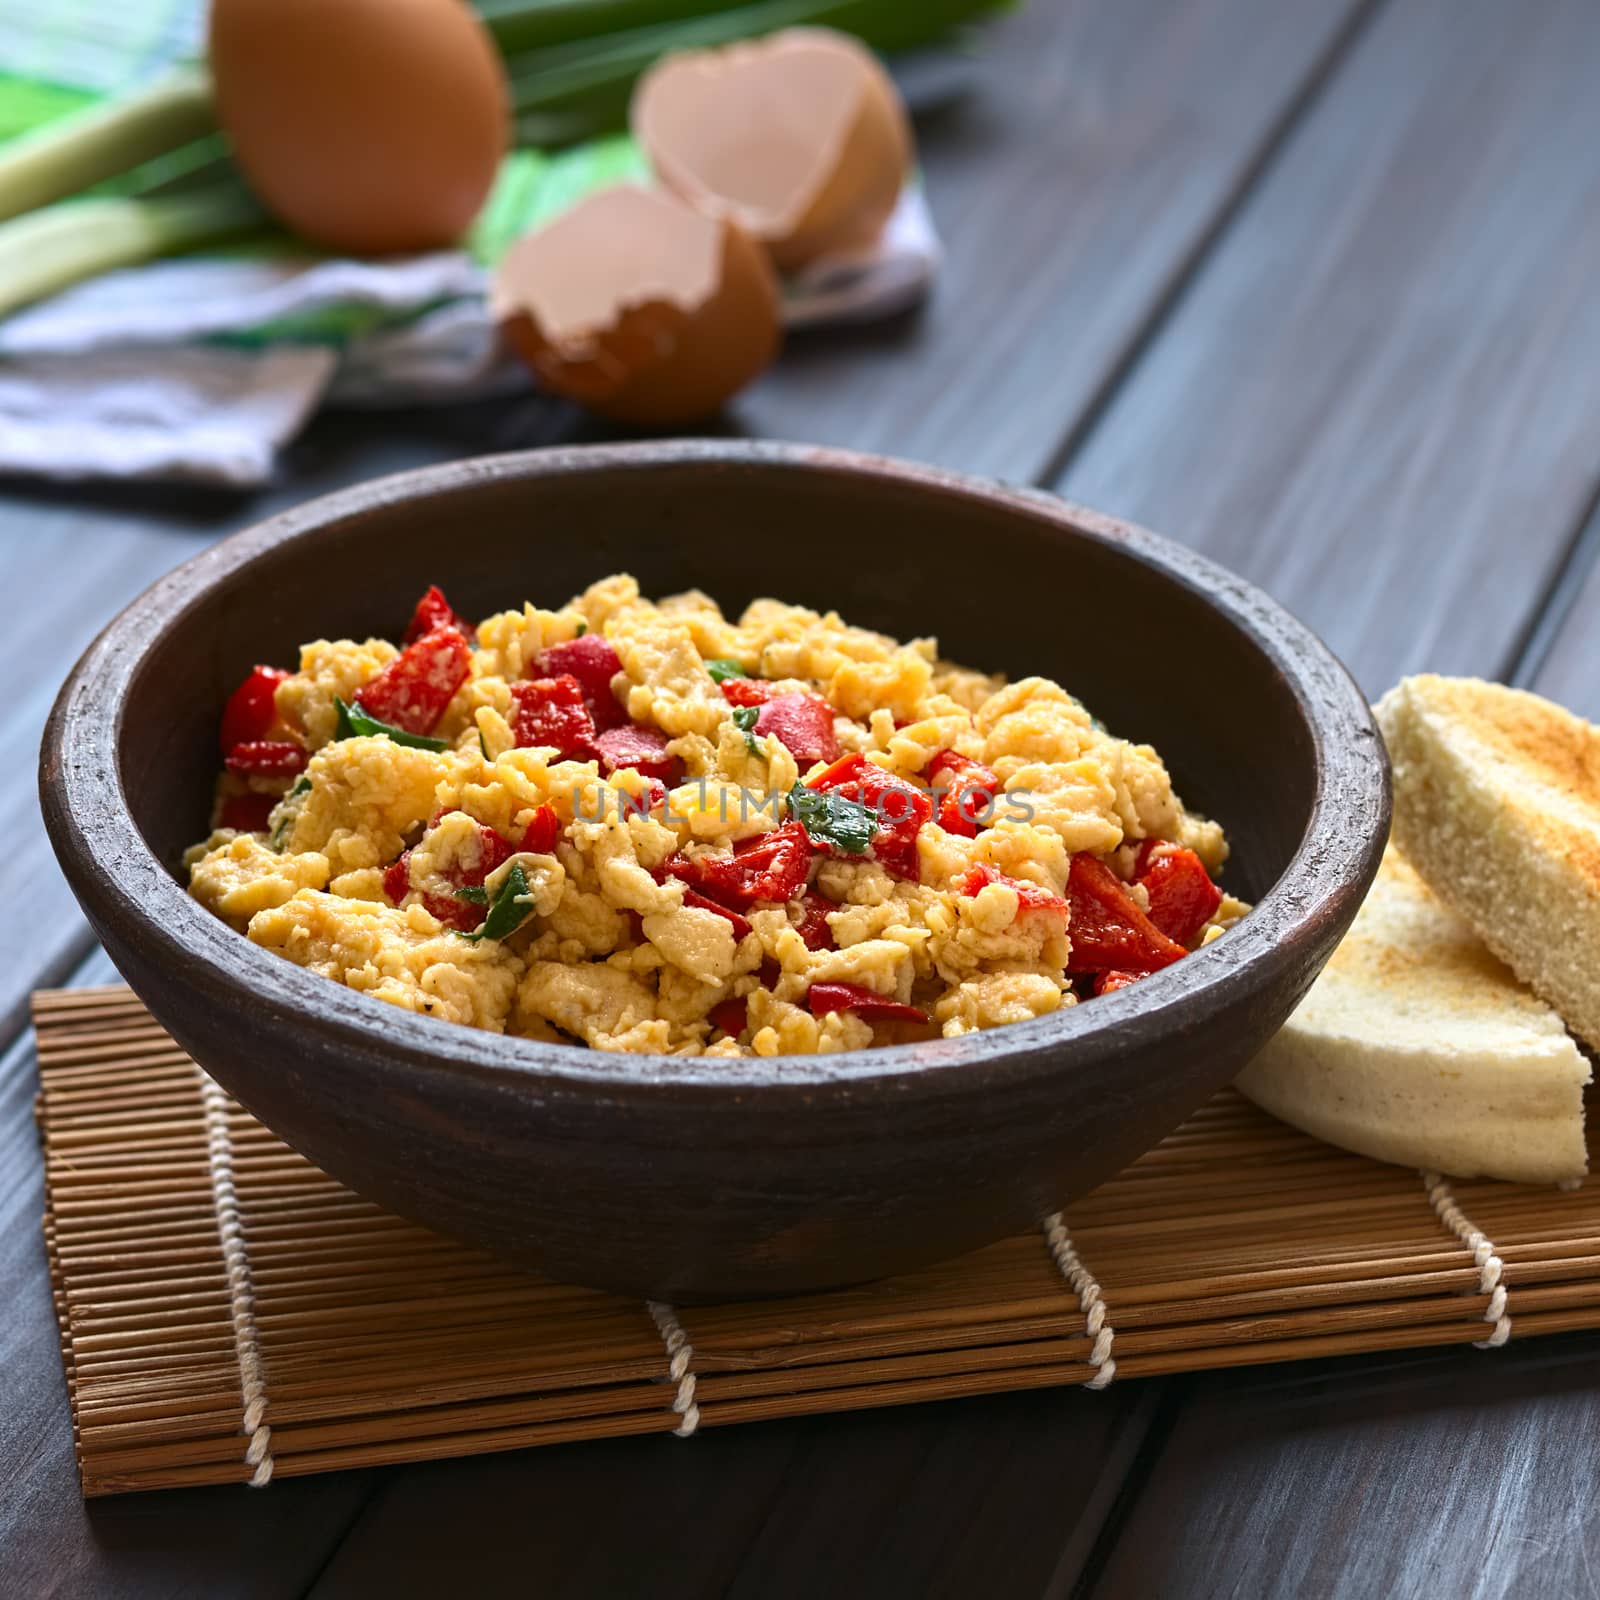 Scrambled Eggs with Red Pepper and Green Onion by ildi